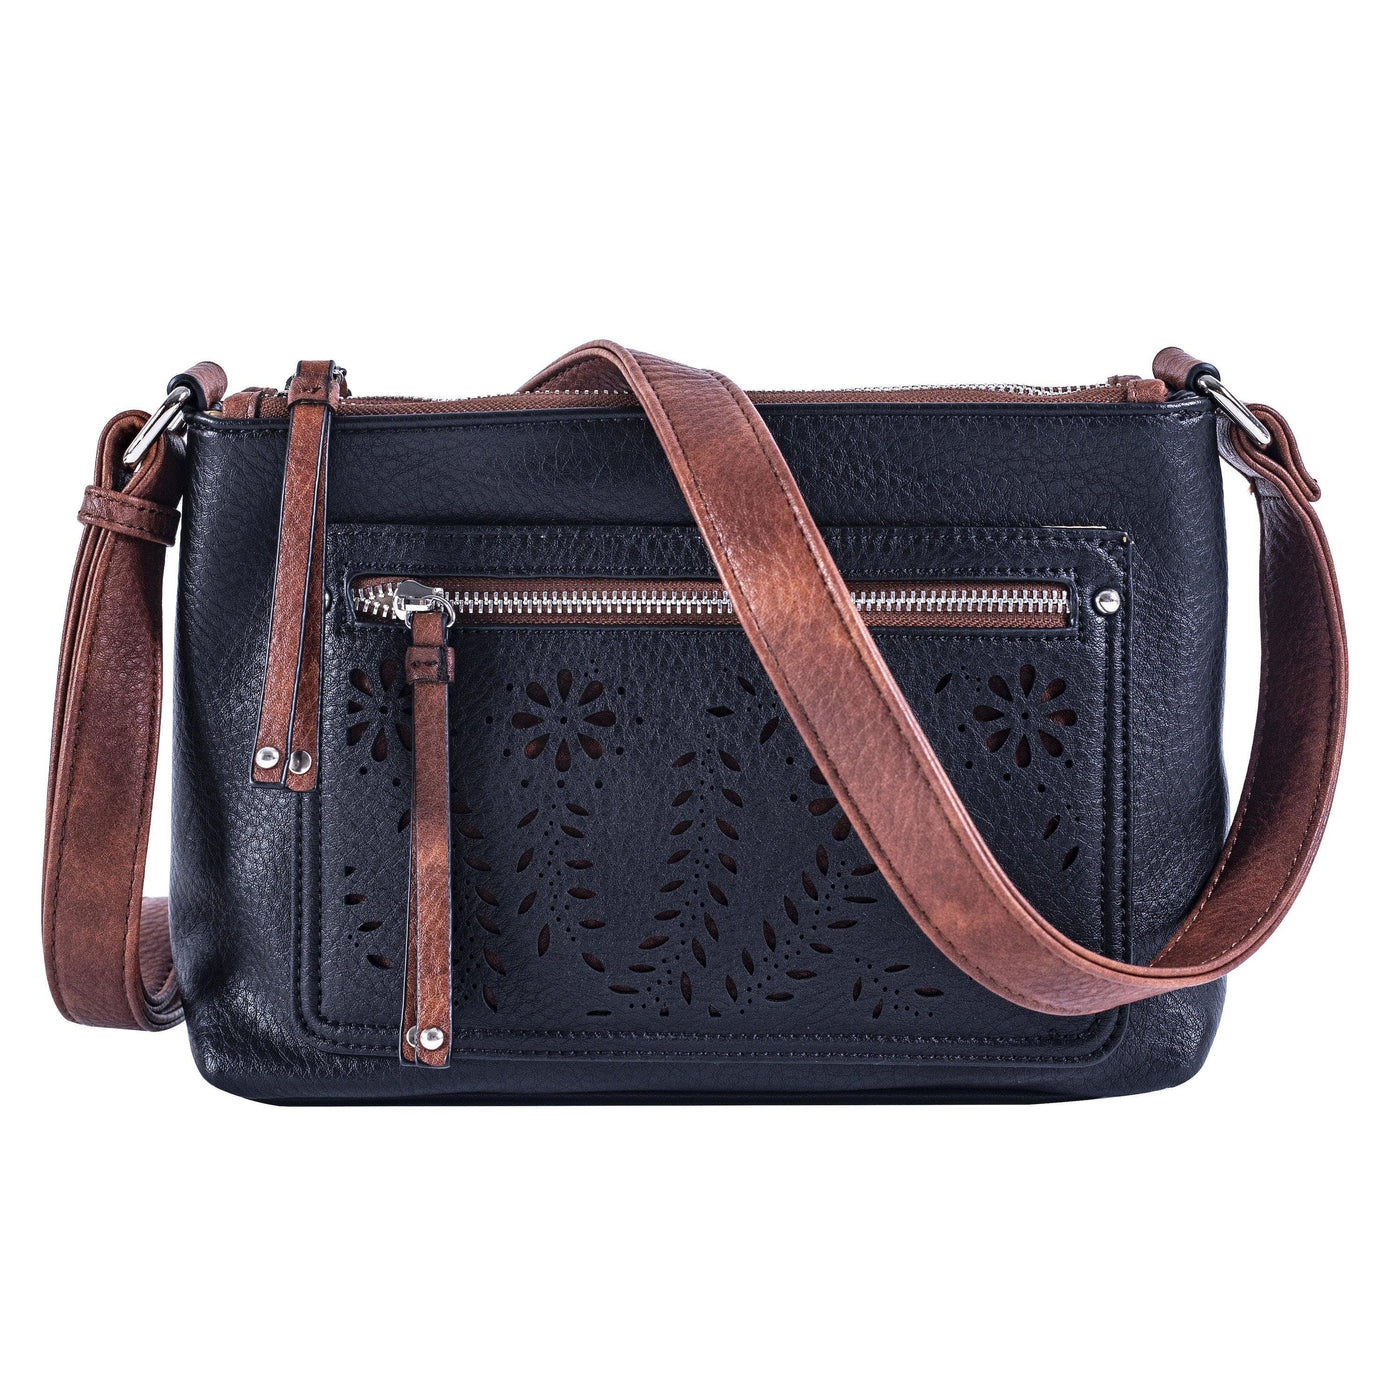 Lady Conceal Concealed Carry Purse Black Concealed Carry Hailey Crossbody Bag by Lady Conceal